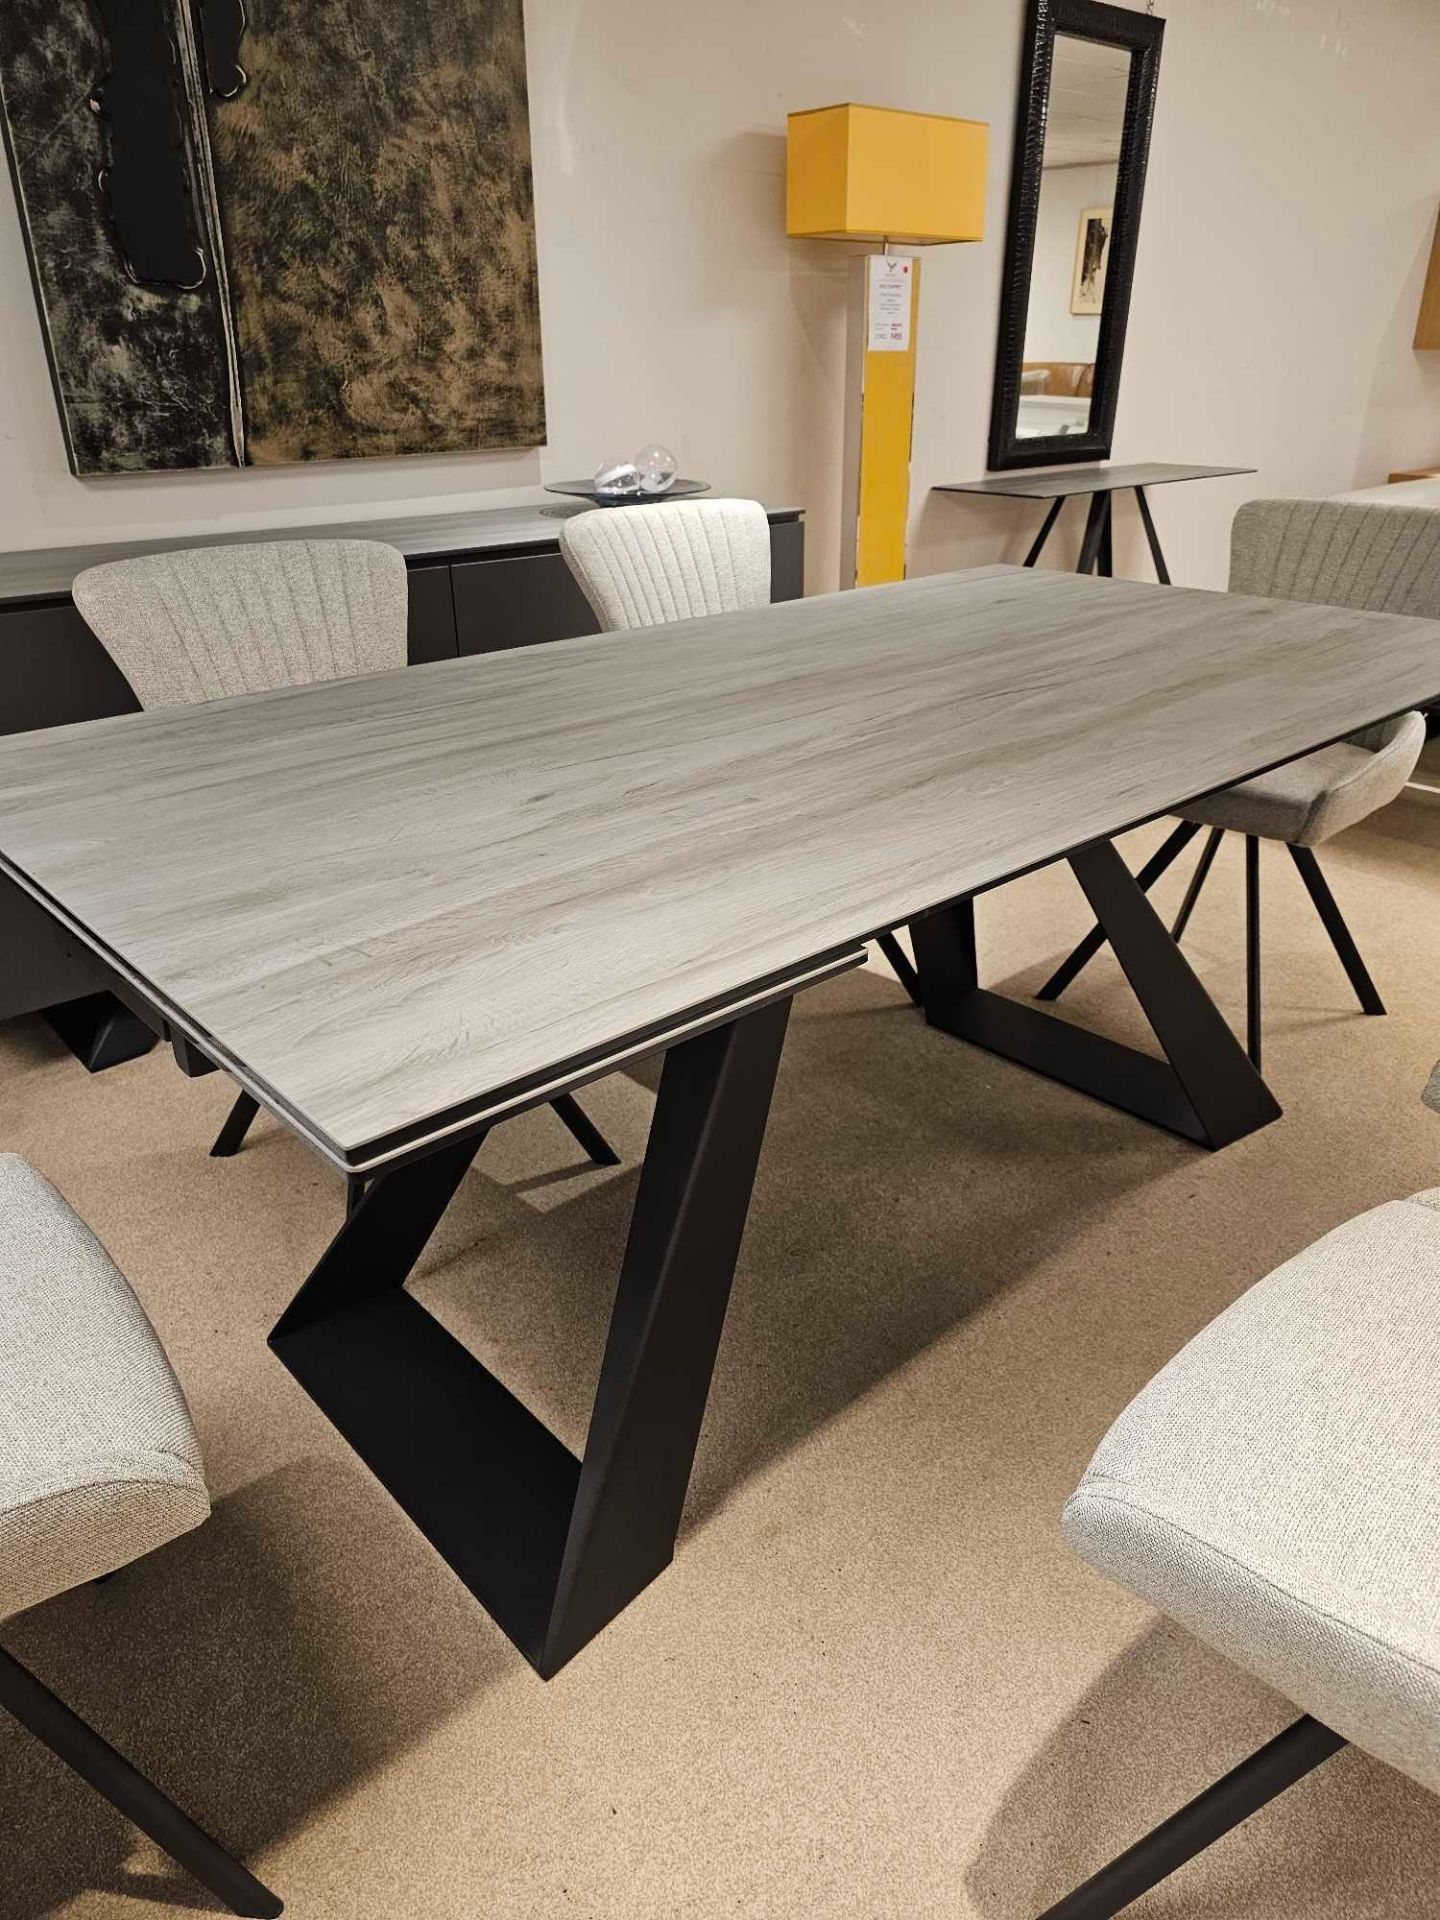 Spartan Dining Table by Kesterport The Spartan Dining Table is part of a sophisticated collection of - Bild 5 aus 12